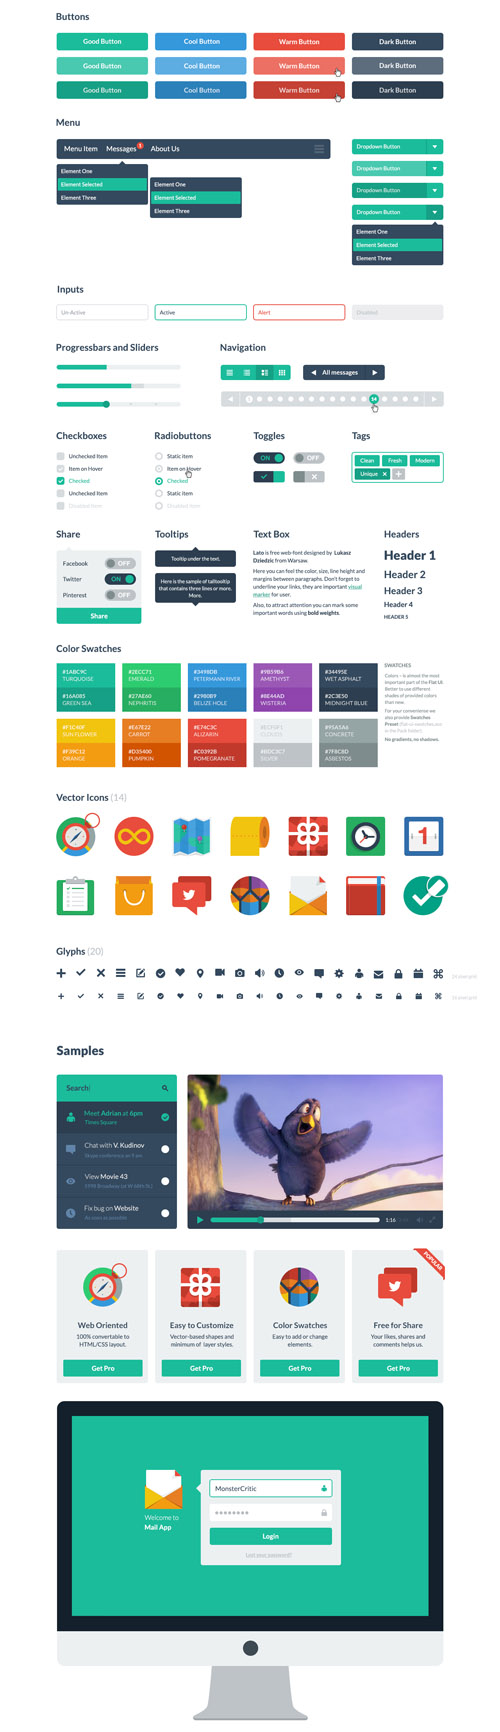 Flat Icons and Web Elements for UI Design-31